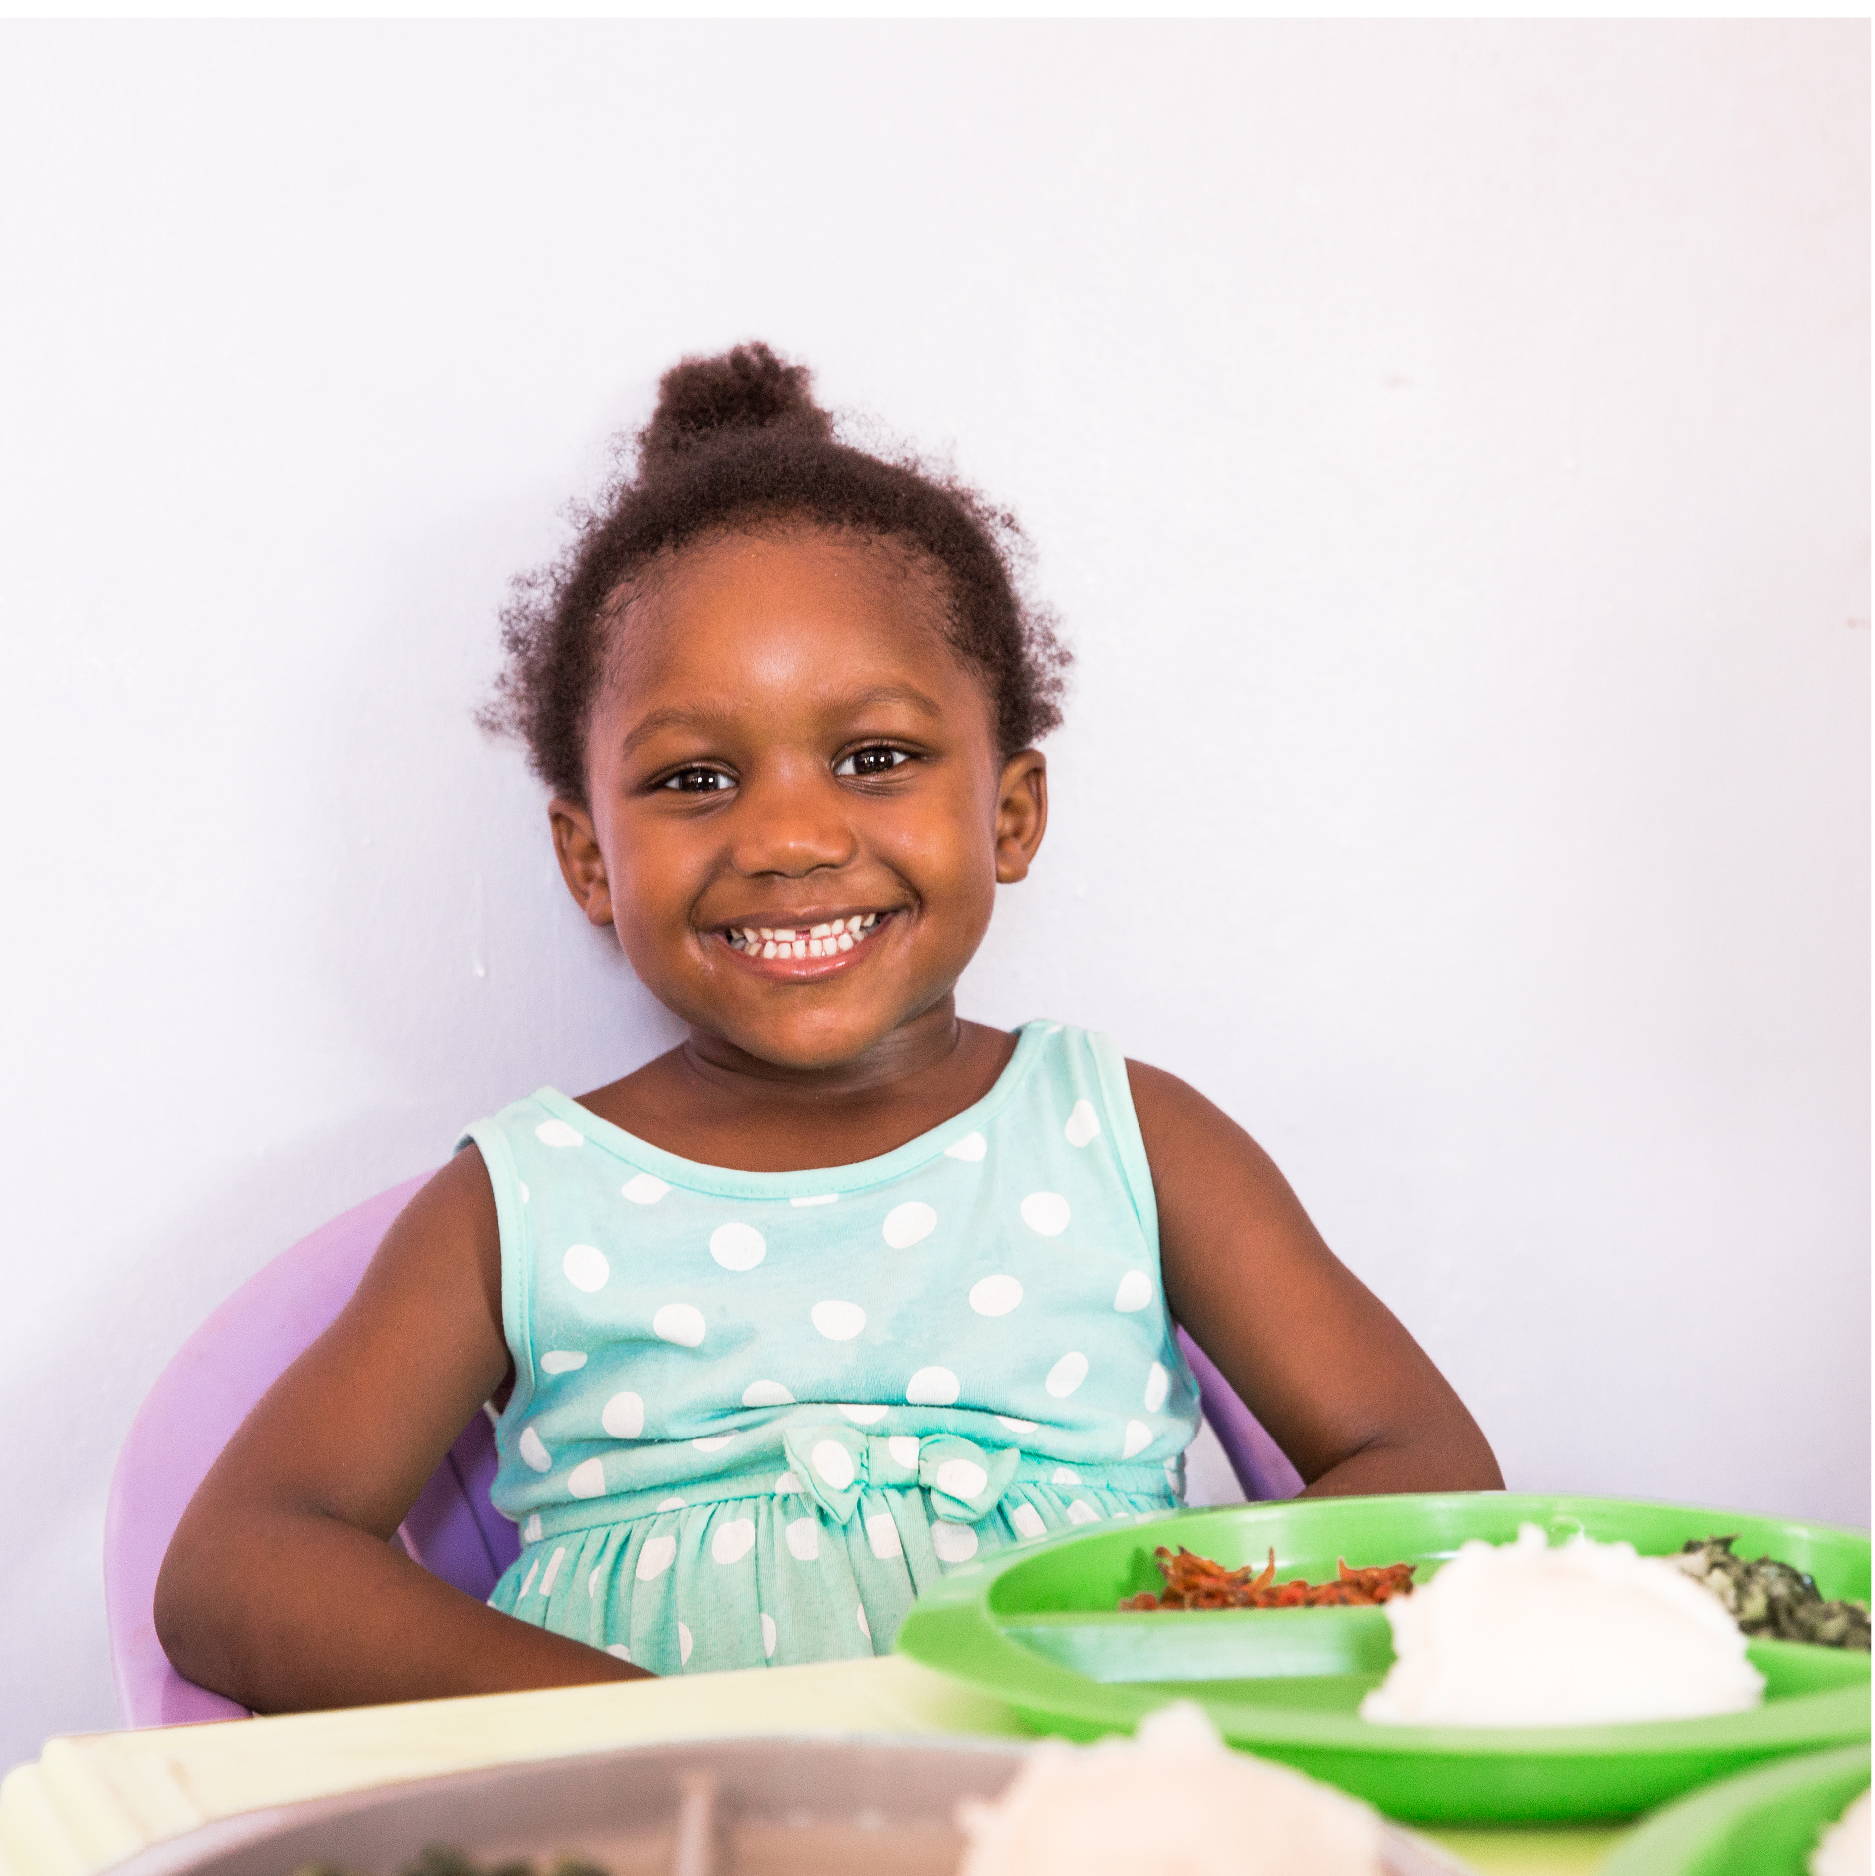 A small Zambian girl in a blue polka dotted dress gives a big smile, showing her teeth, as she sits to eat lunch. 